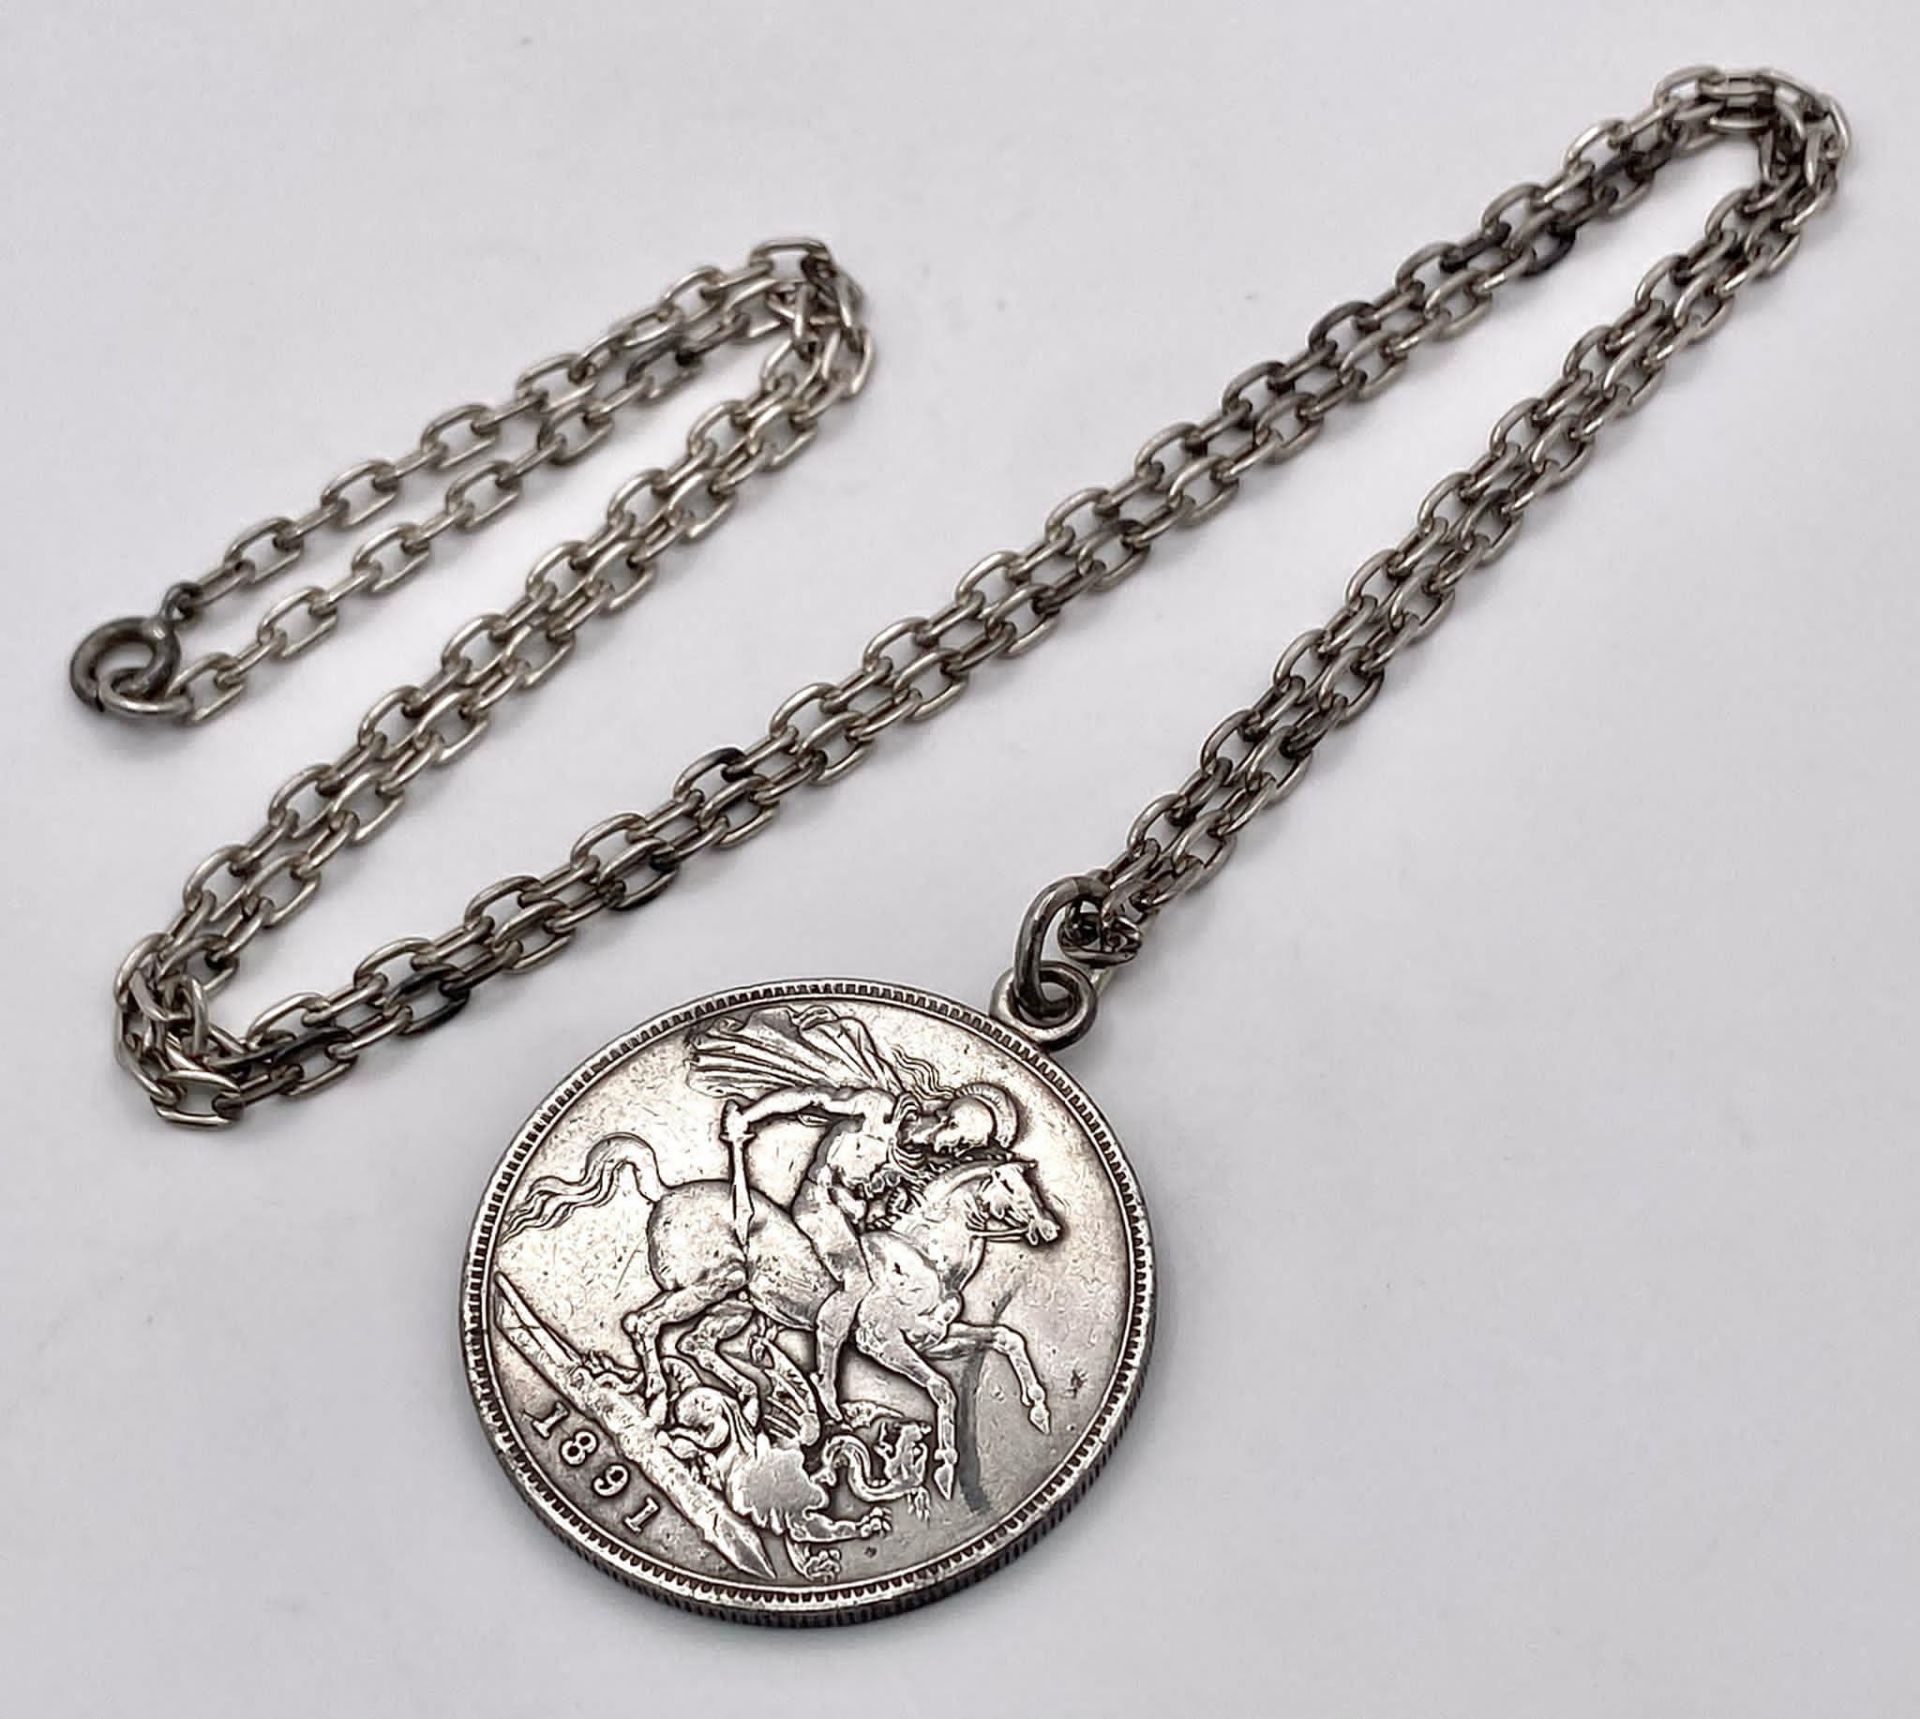 An 1891 Queen Victoria Silver Crown in a Pendant Setting on a Sterling Silver Chain. 41.21g total - Bild 4 aus 6